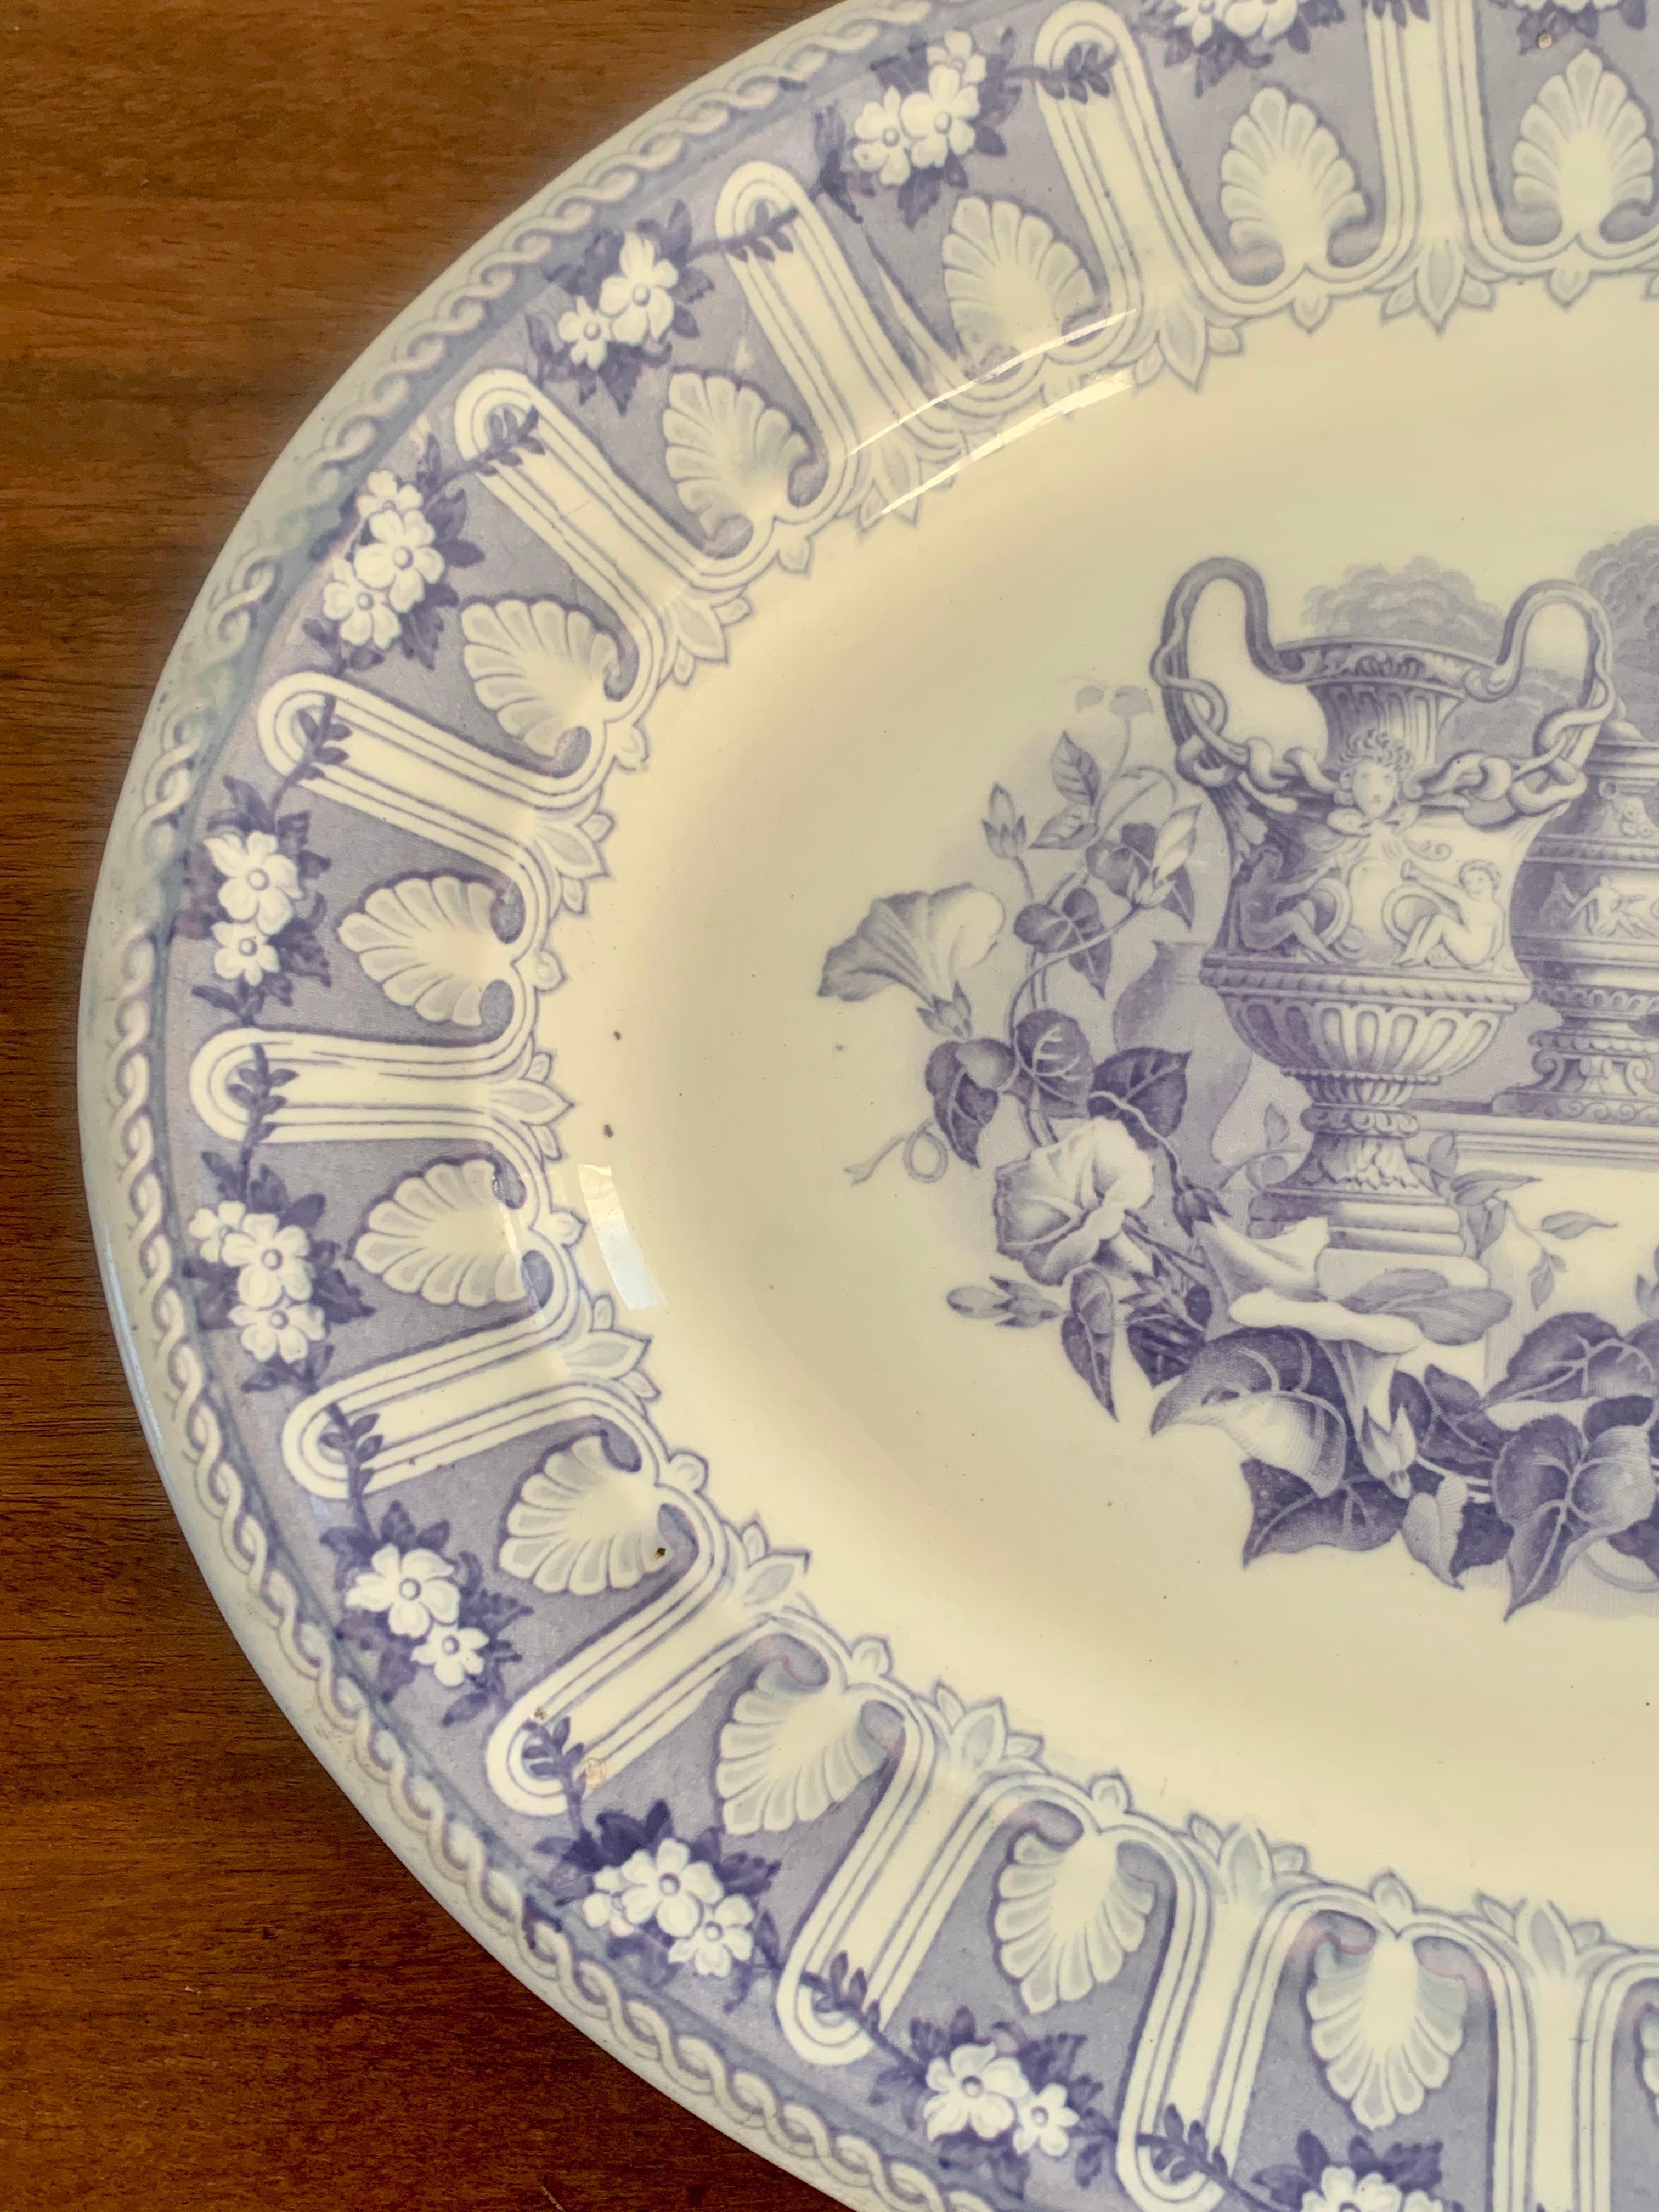 A stunning antique blue and white ironstone platter

USA, 19th Century

Measures: 16.13